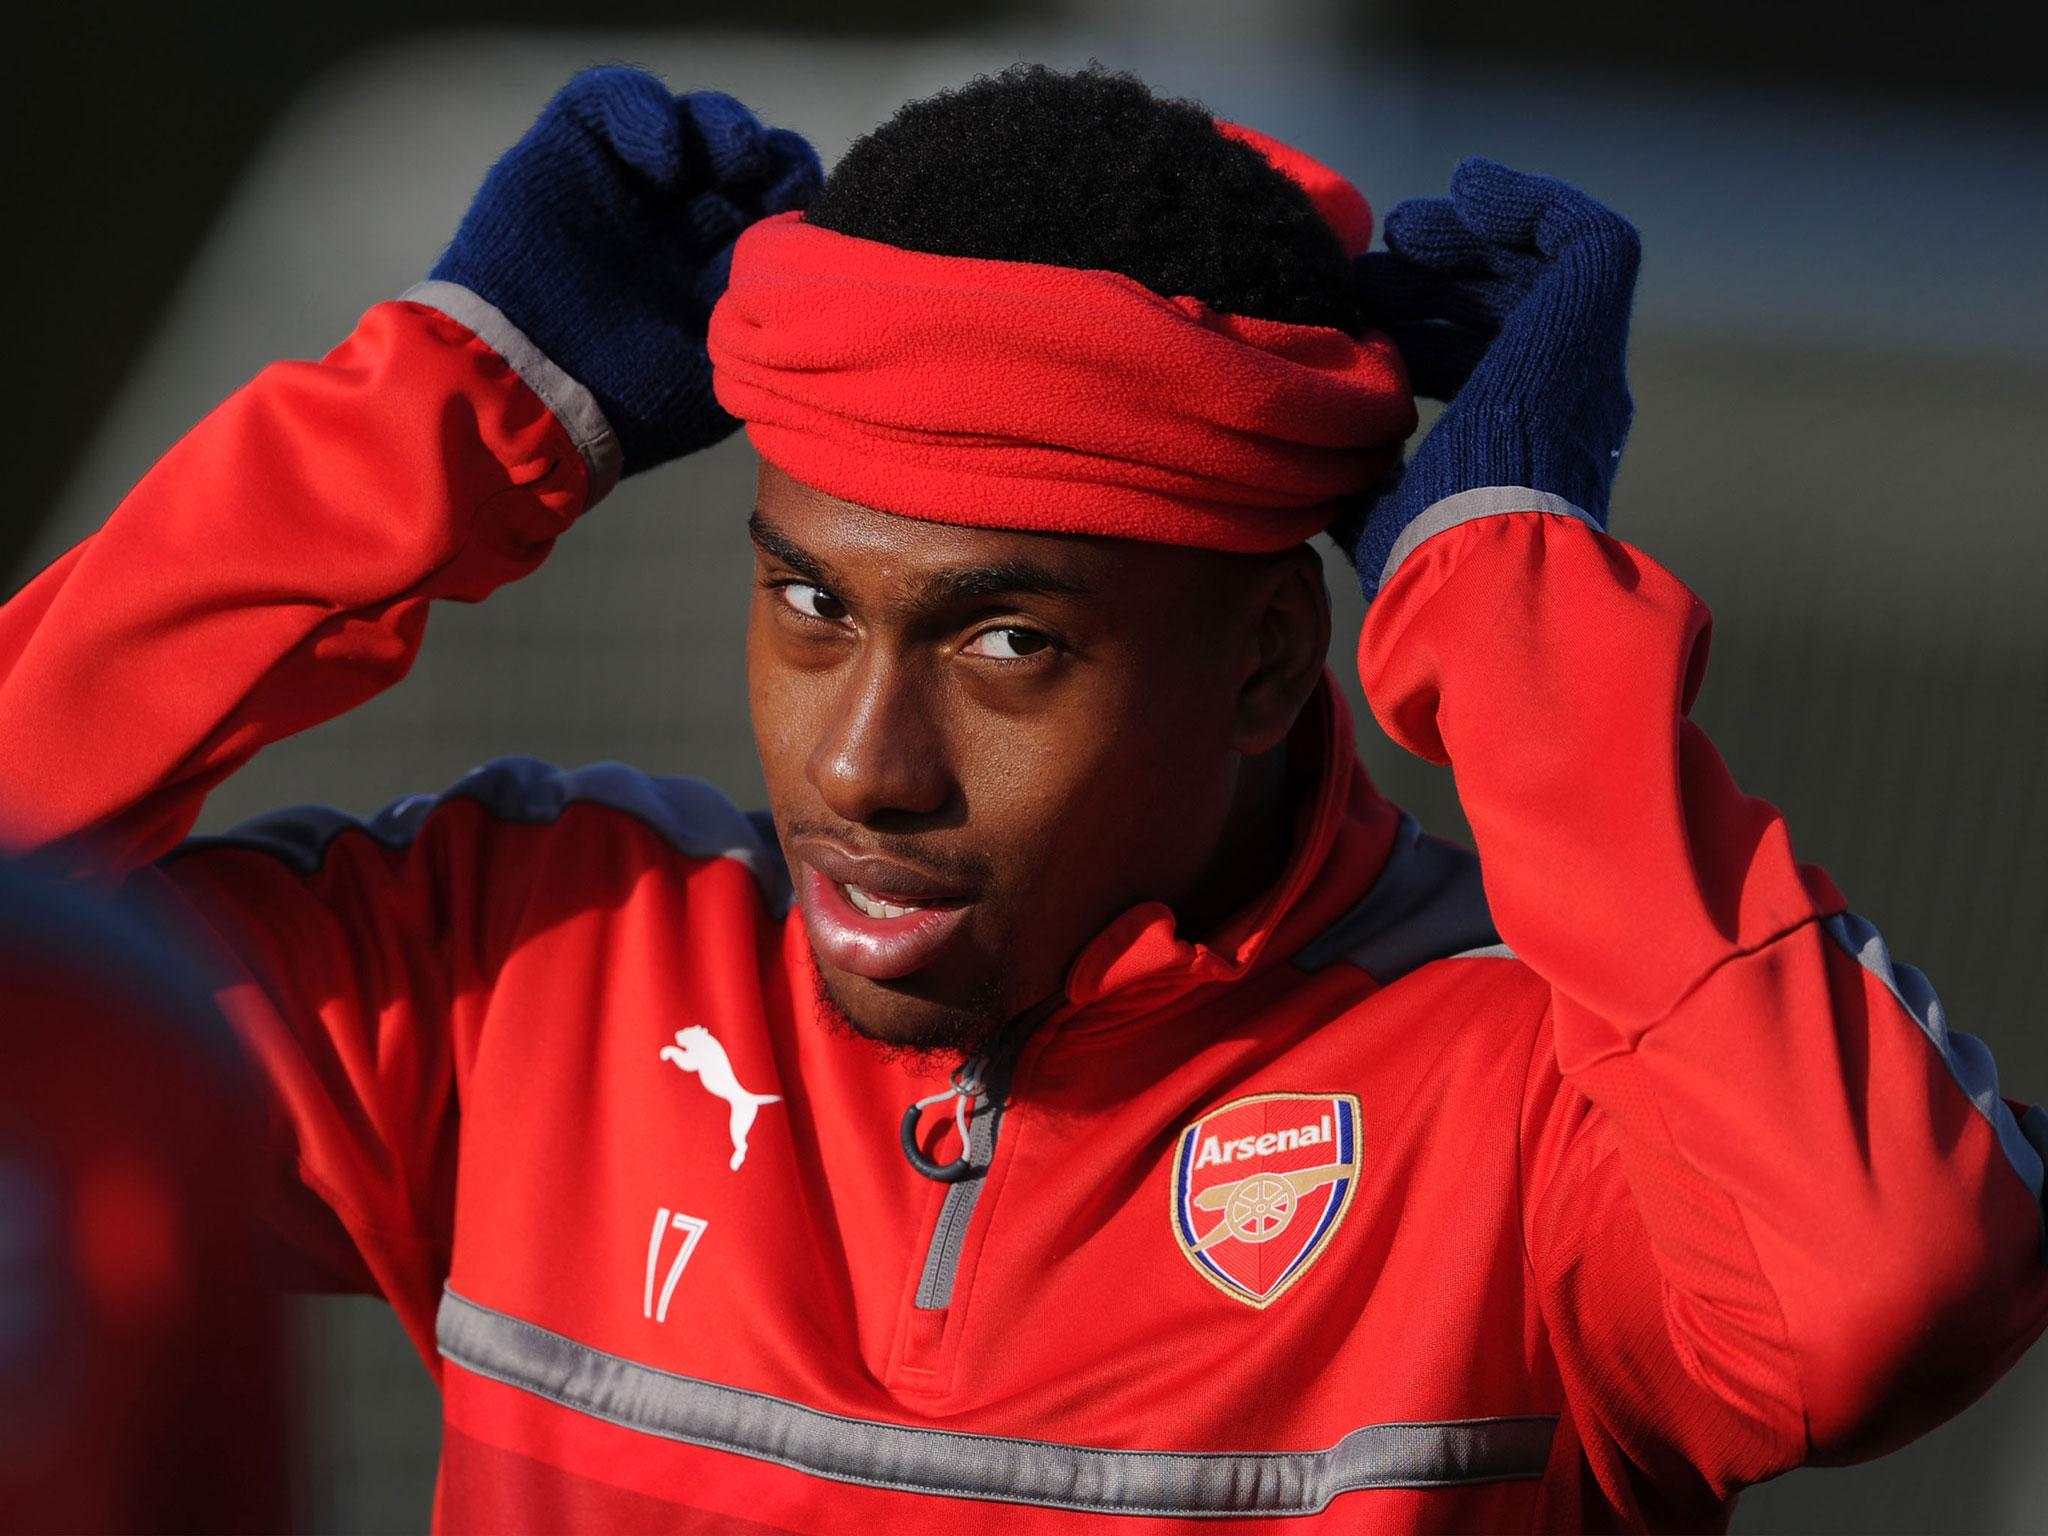 Iwobi has enjoyed an impressive rise to prominence after making his Arsenal debut 13 months ago